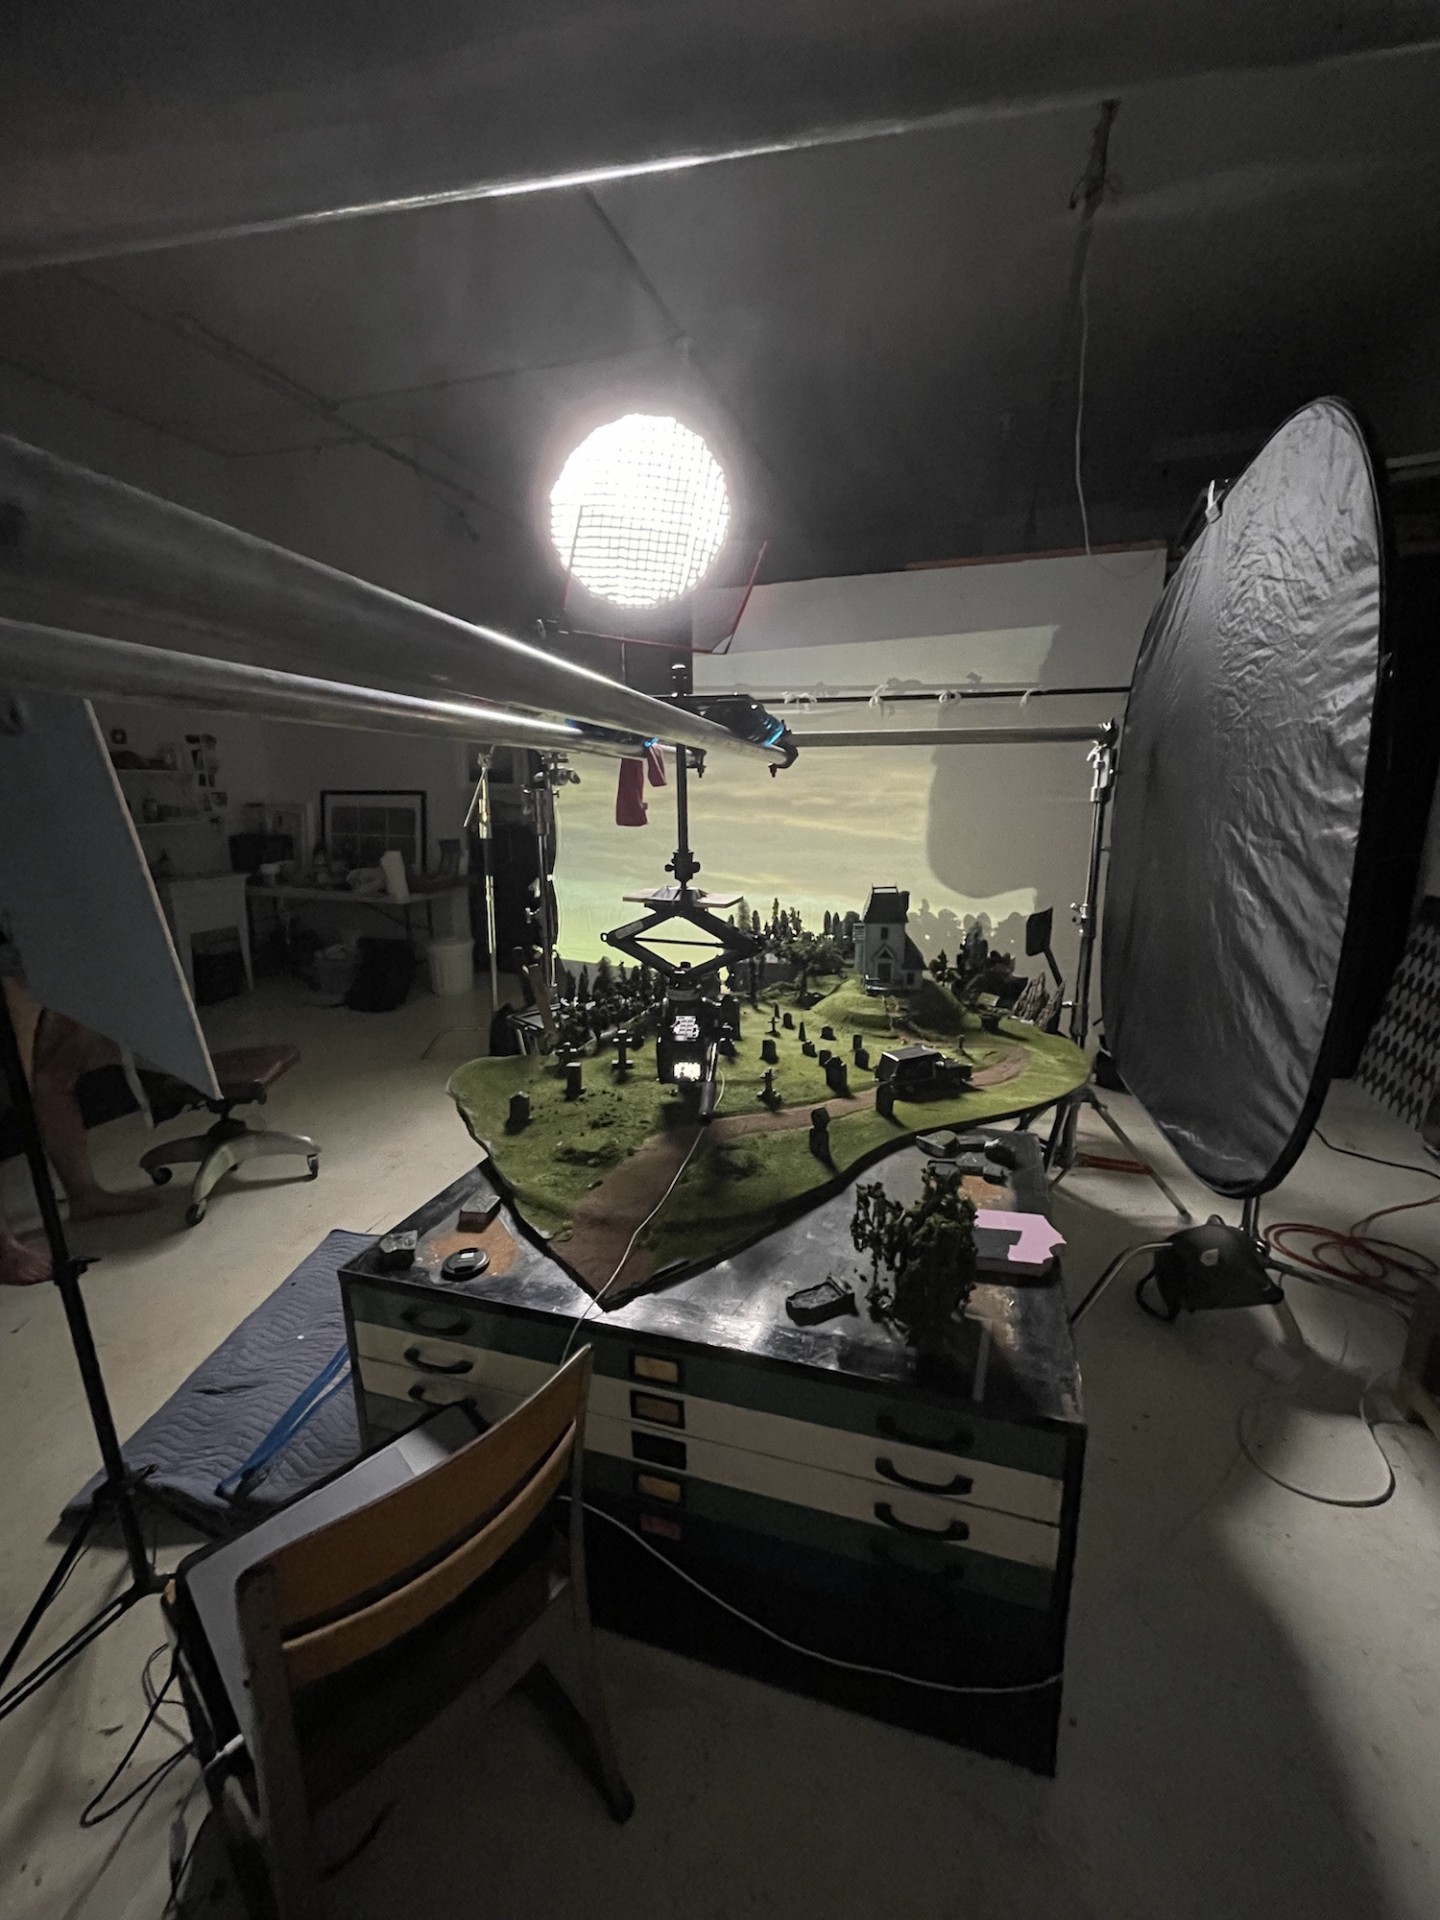 miniature set with lighting and film apparatus